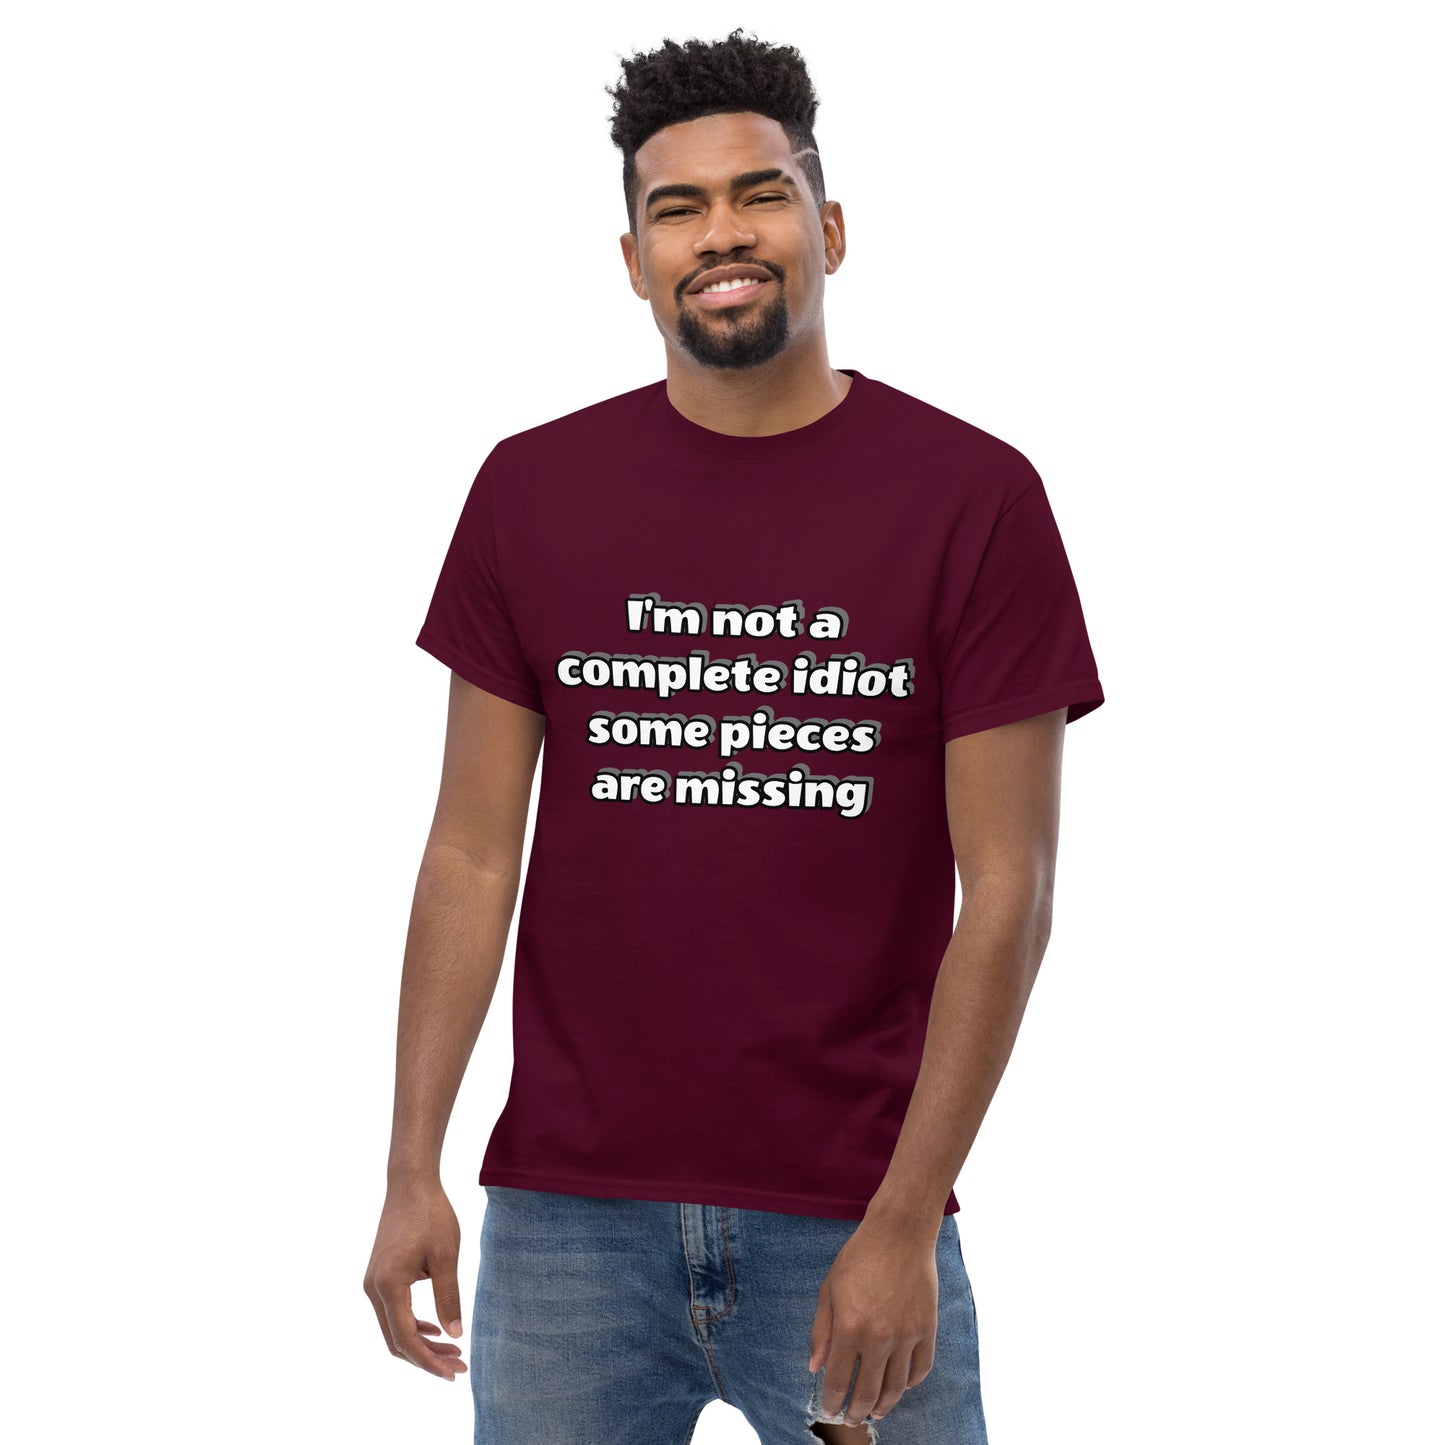 Men with maroon t-shirt with text “I’m not a complete idiot, some pieces are missing”